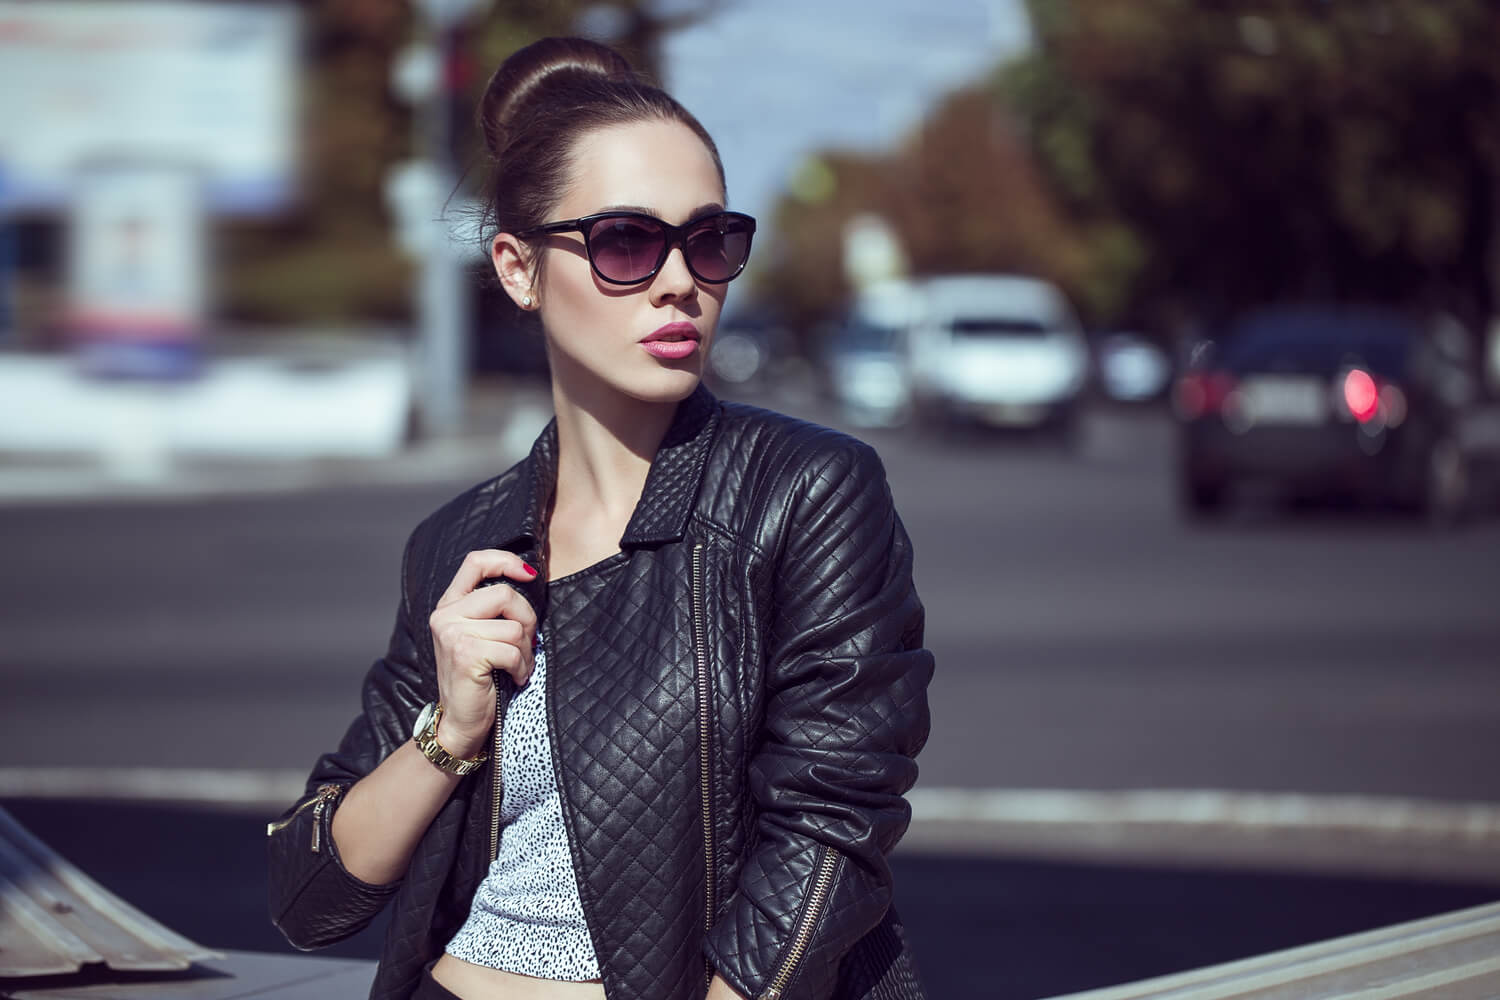 Young fashionable woman standing outside, wearing a black jacket, a grey blouse, dark sunglasses, and with a defined jawline.